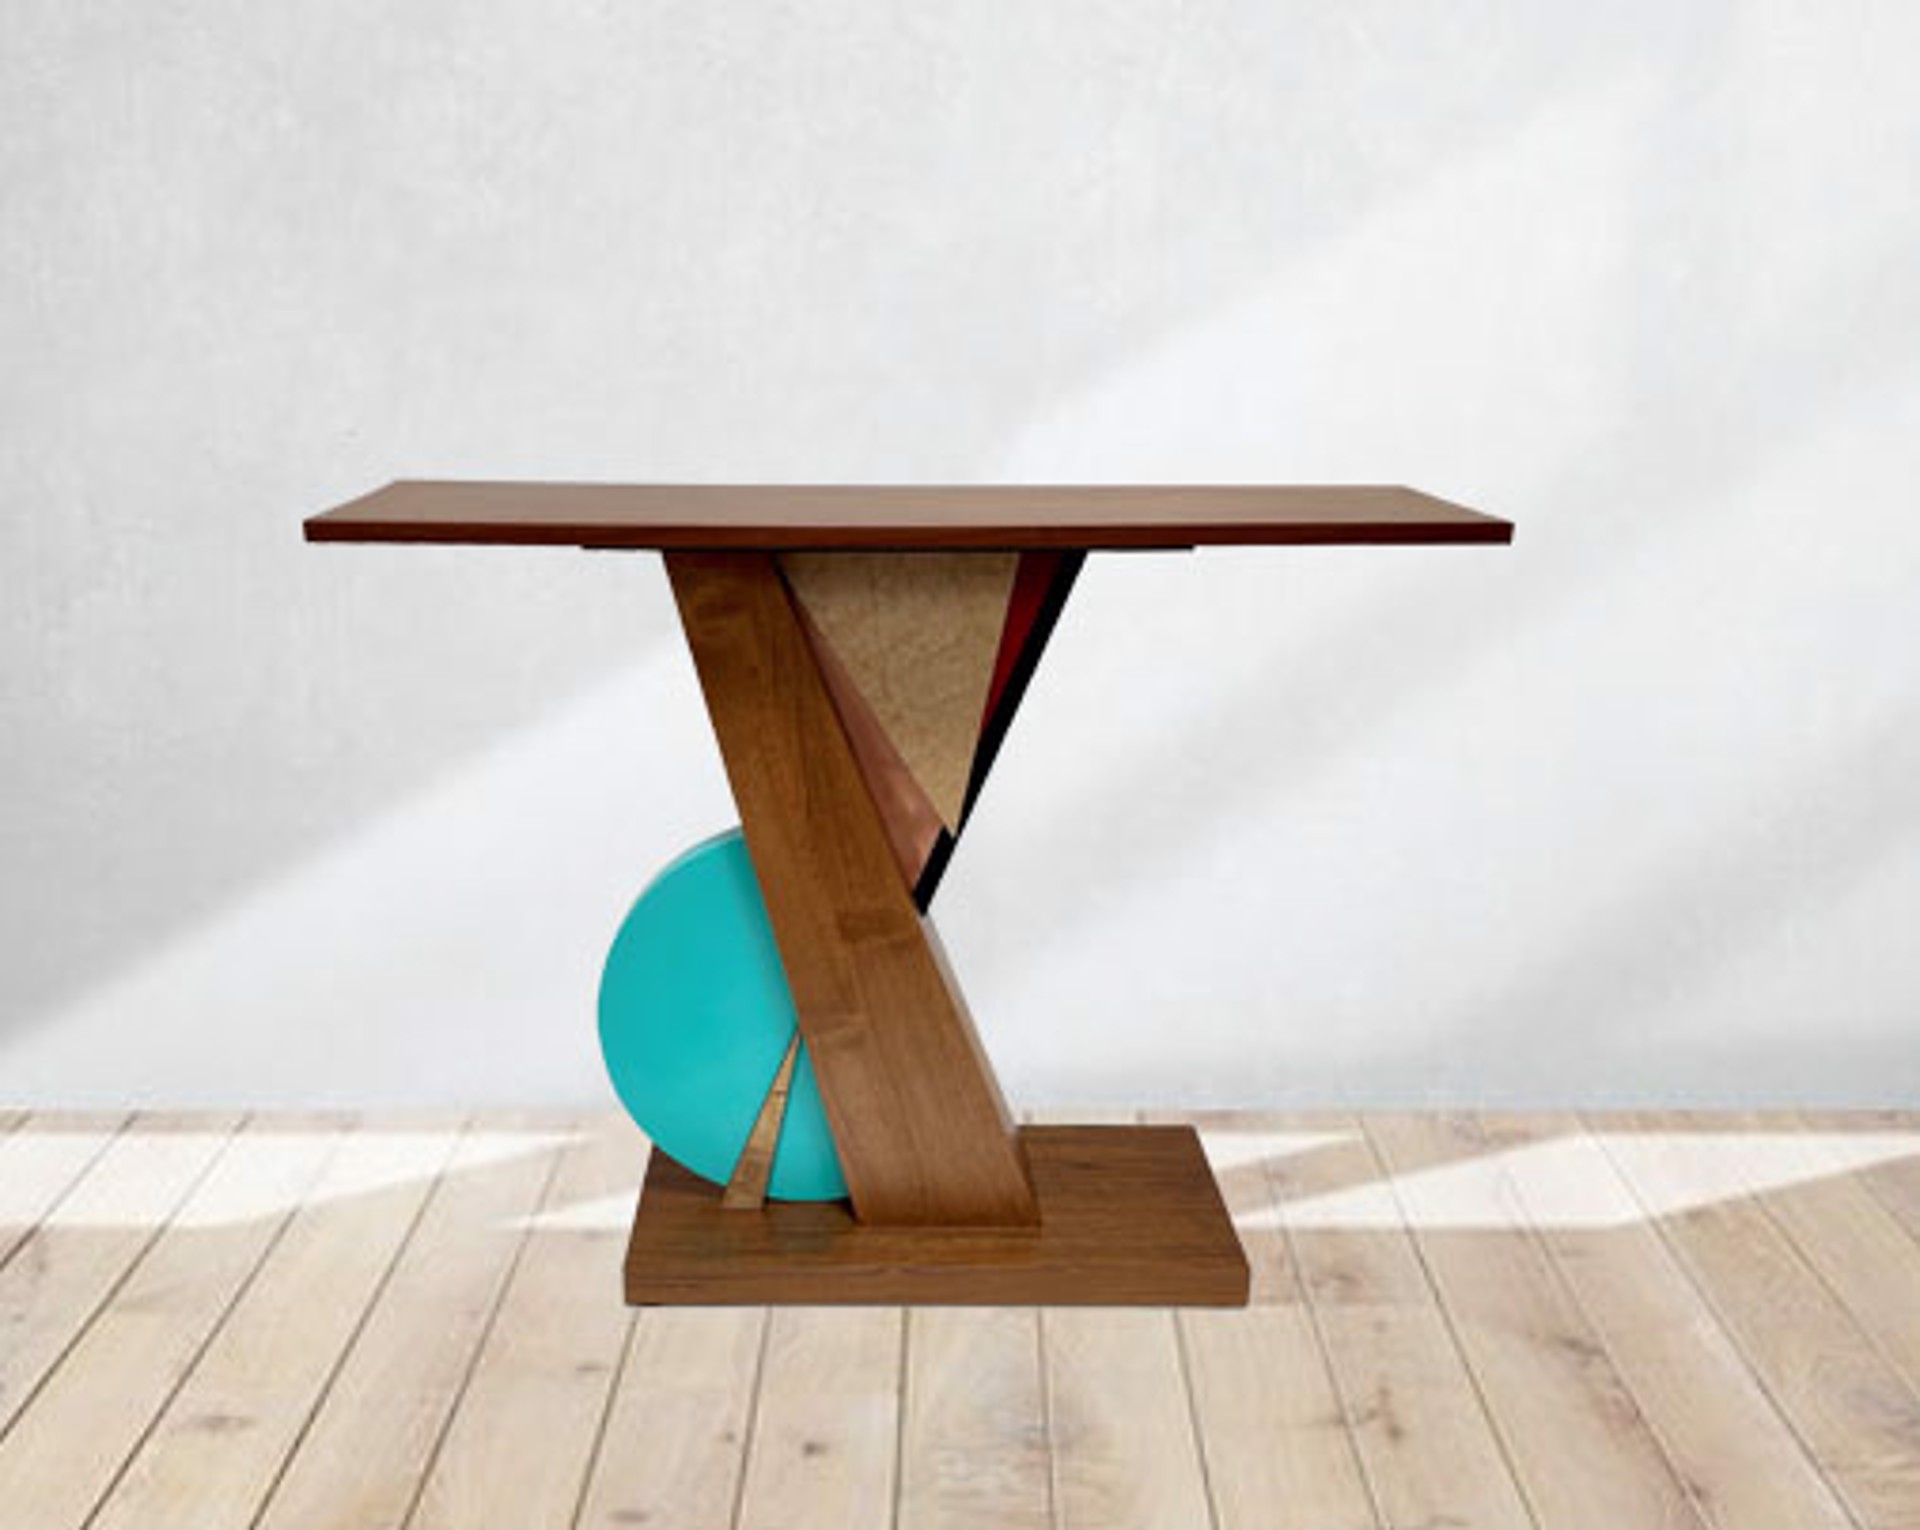 Shedue & Turquoise Table ~ Top & Base Shedue, Alder Veneer, Birds Eye Maple, Painted Finish & Copper by Joseph Nikrasch